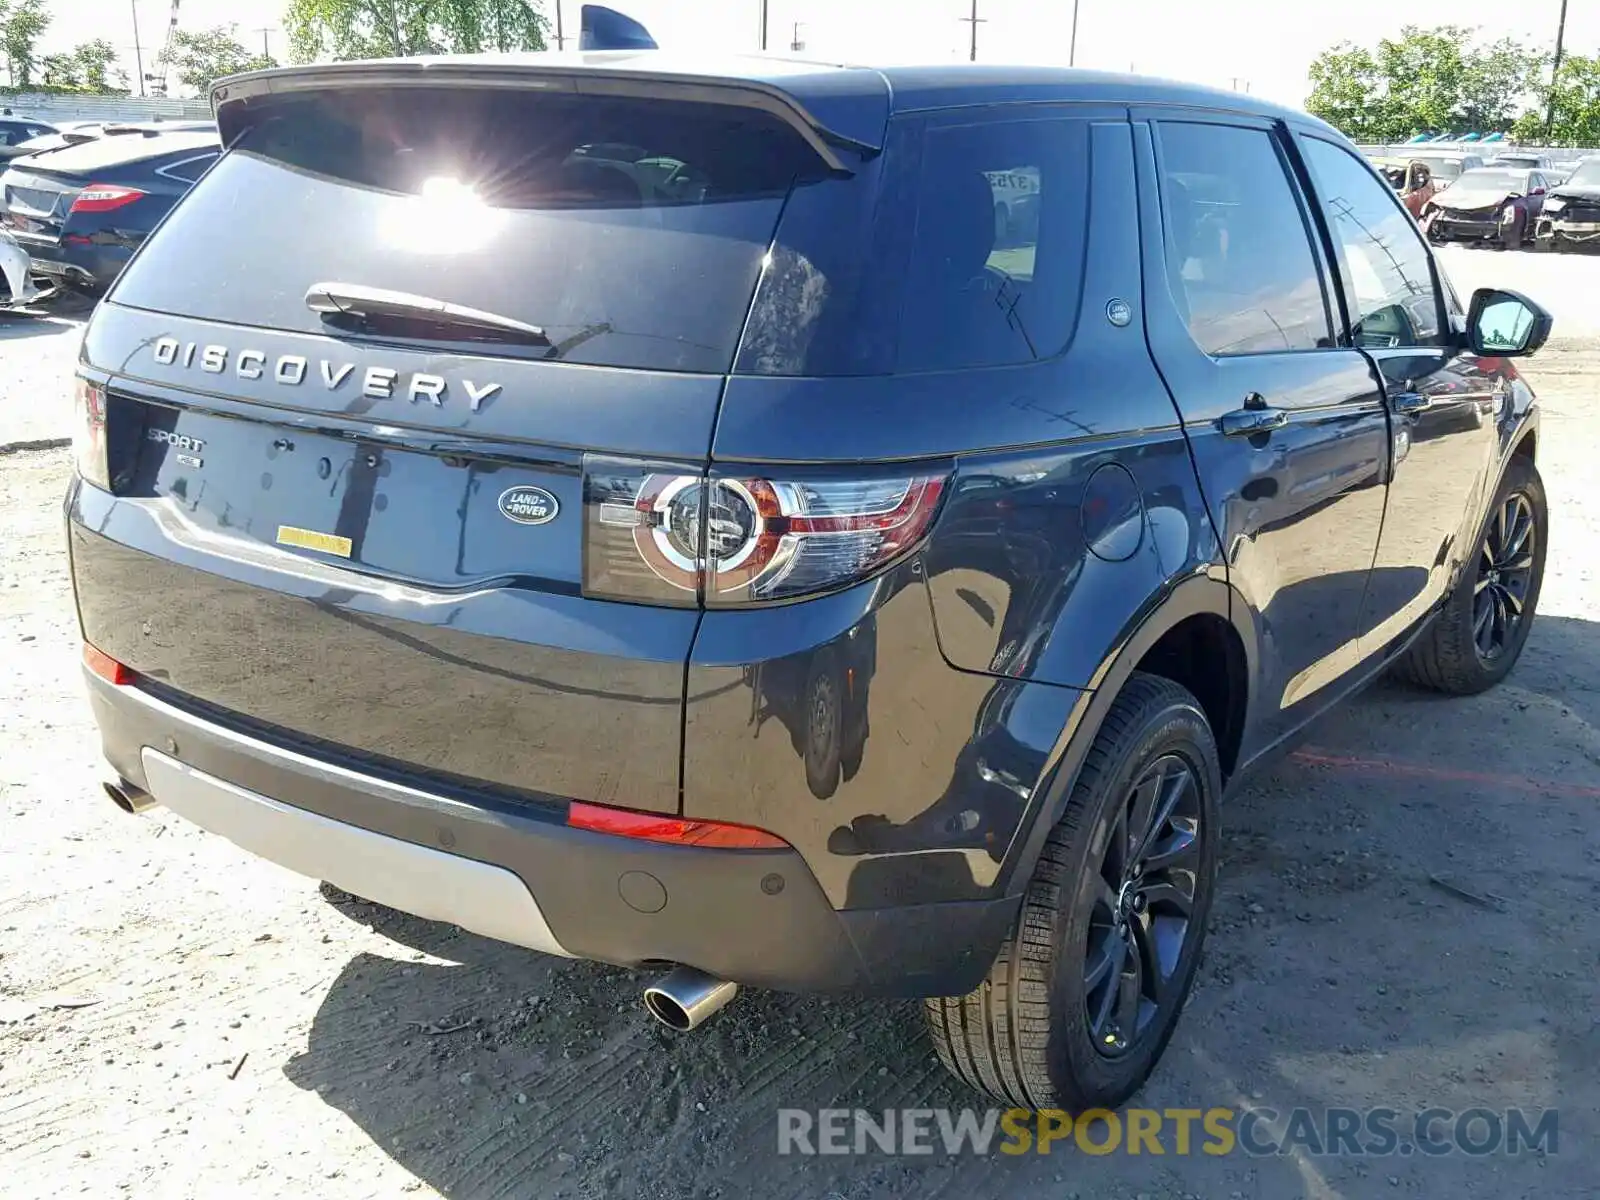 4 Photograph of a damaged car SALCR2FX5KH799578 LAND ROVER DISCOVERY 2019